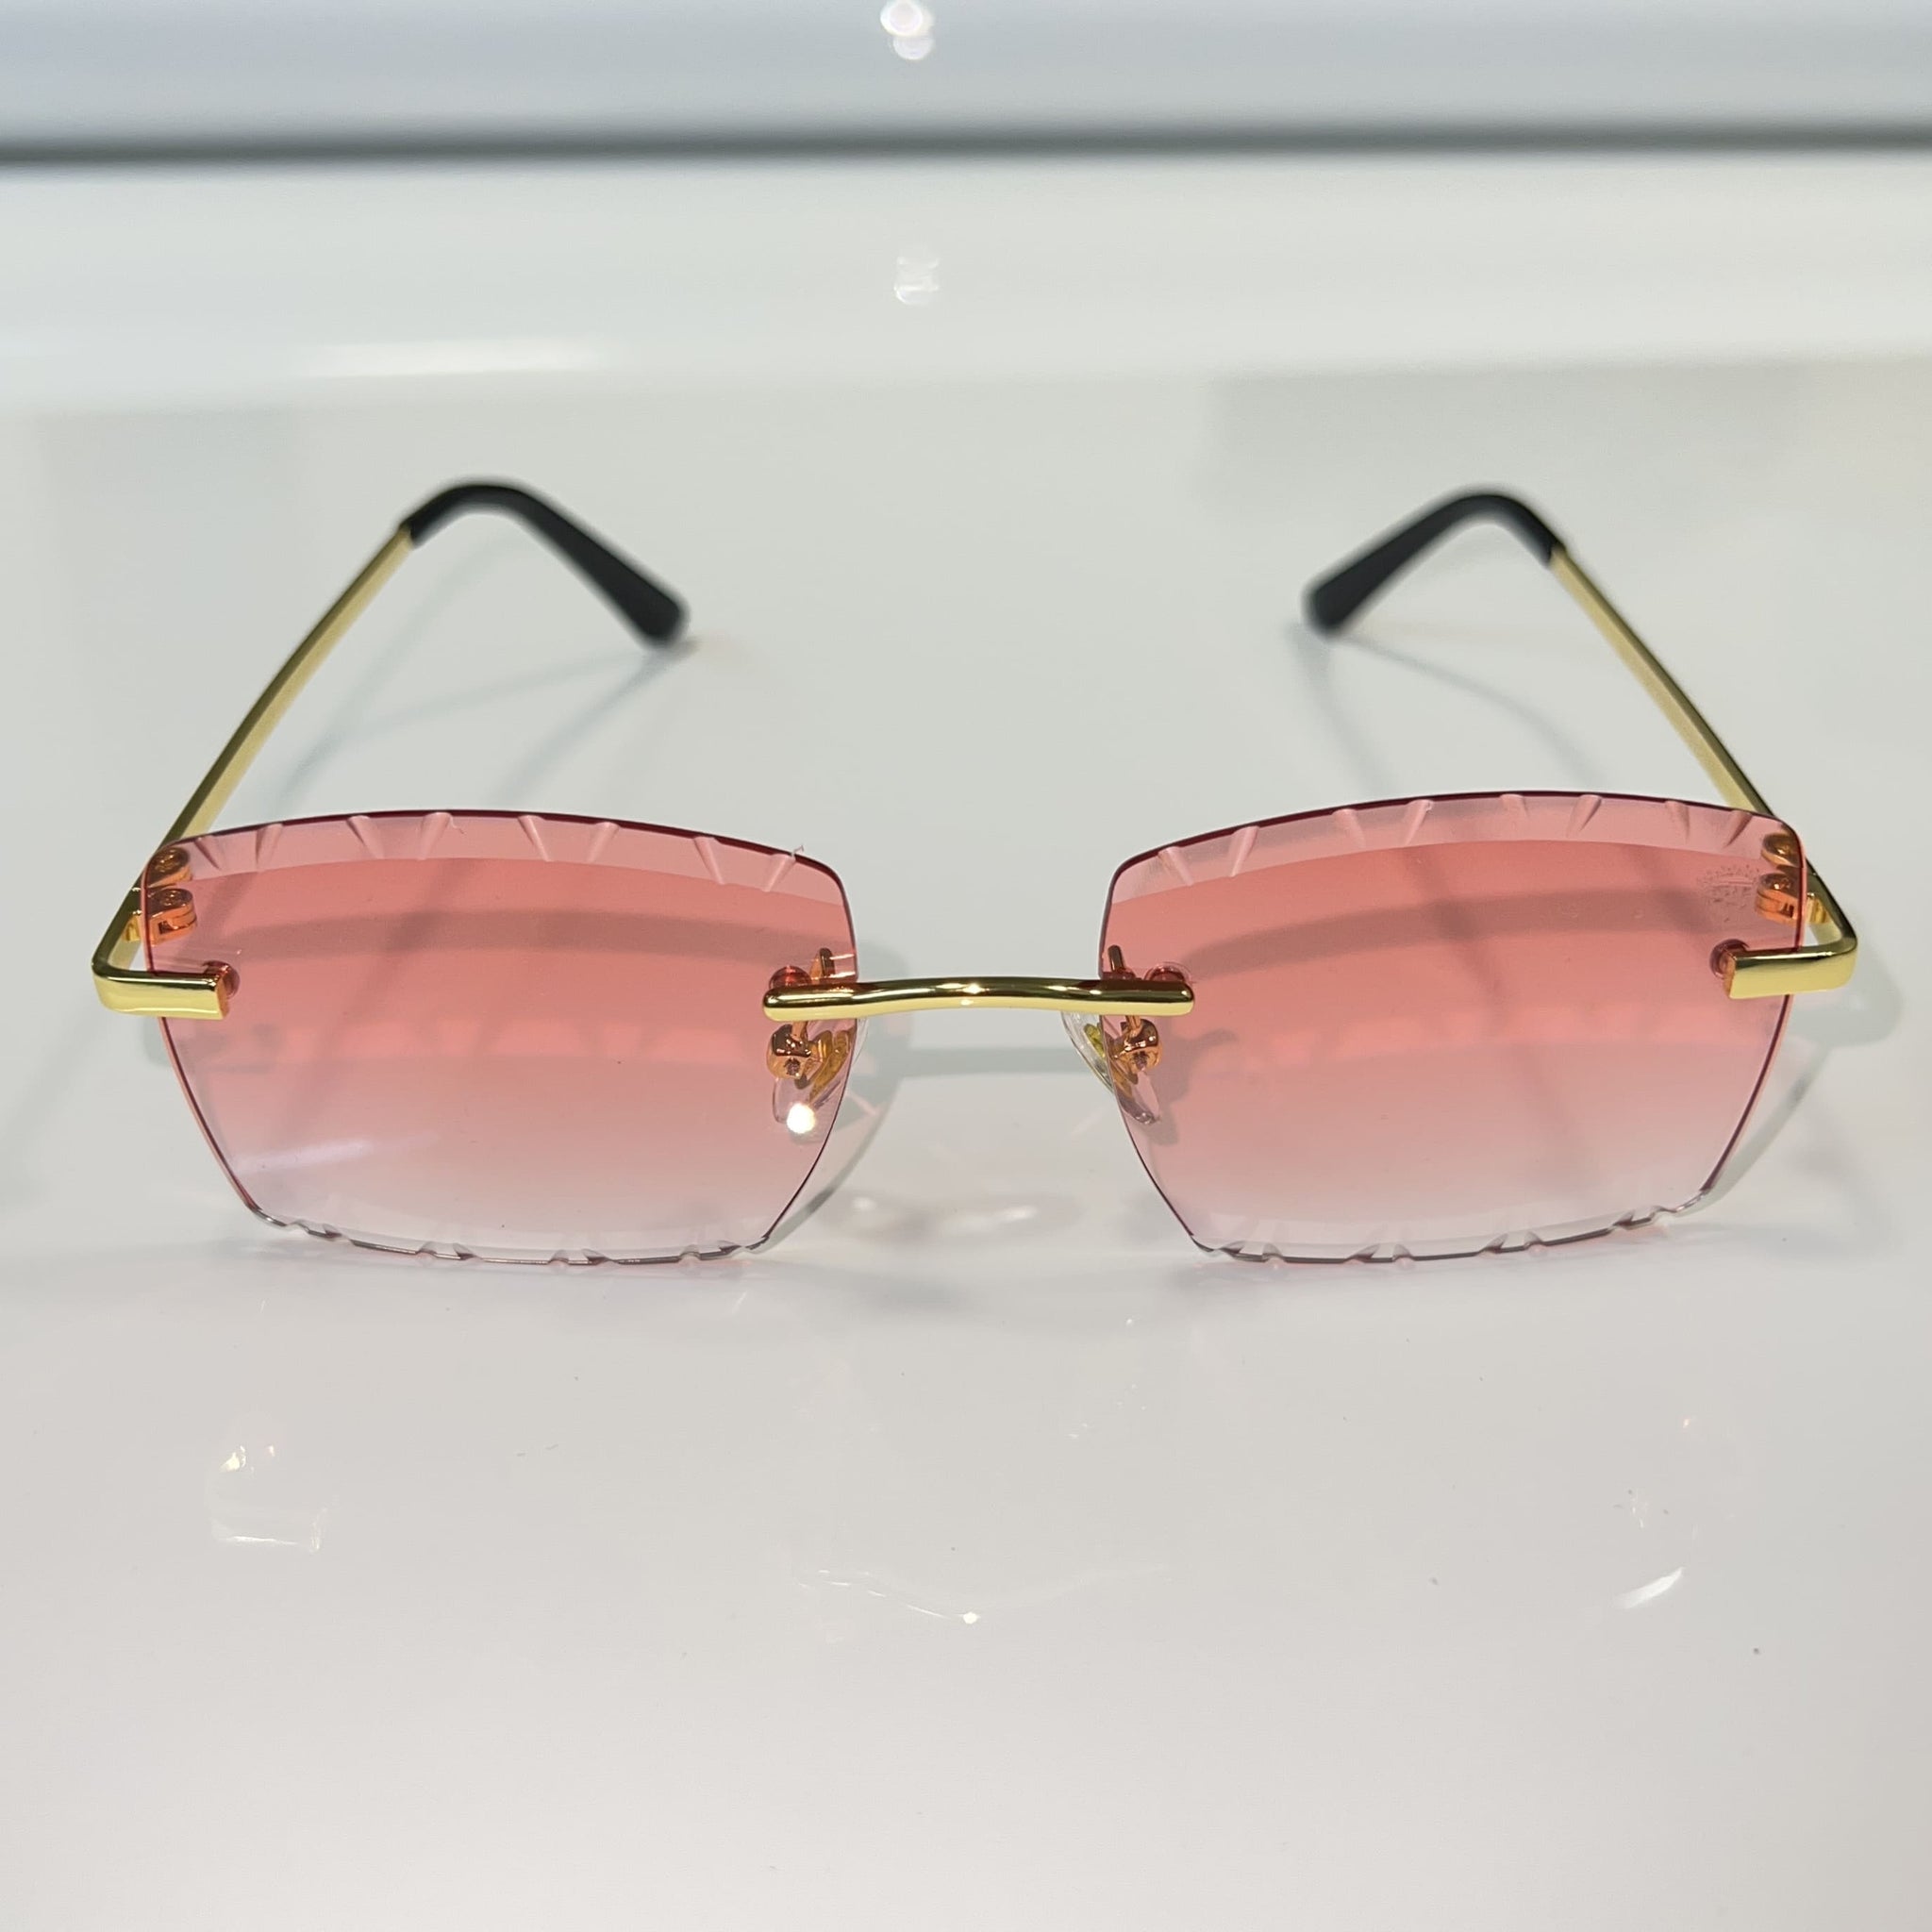 Dripcut Glasses - 14k gold plated - Pink Shade - Sehgal Glasses